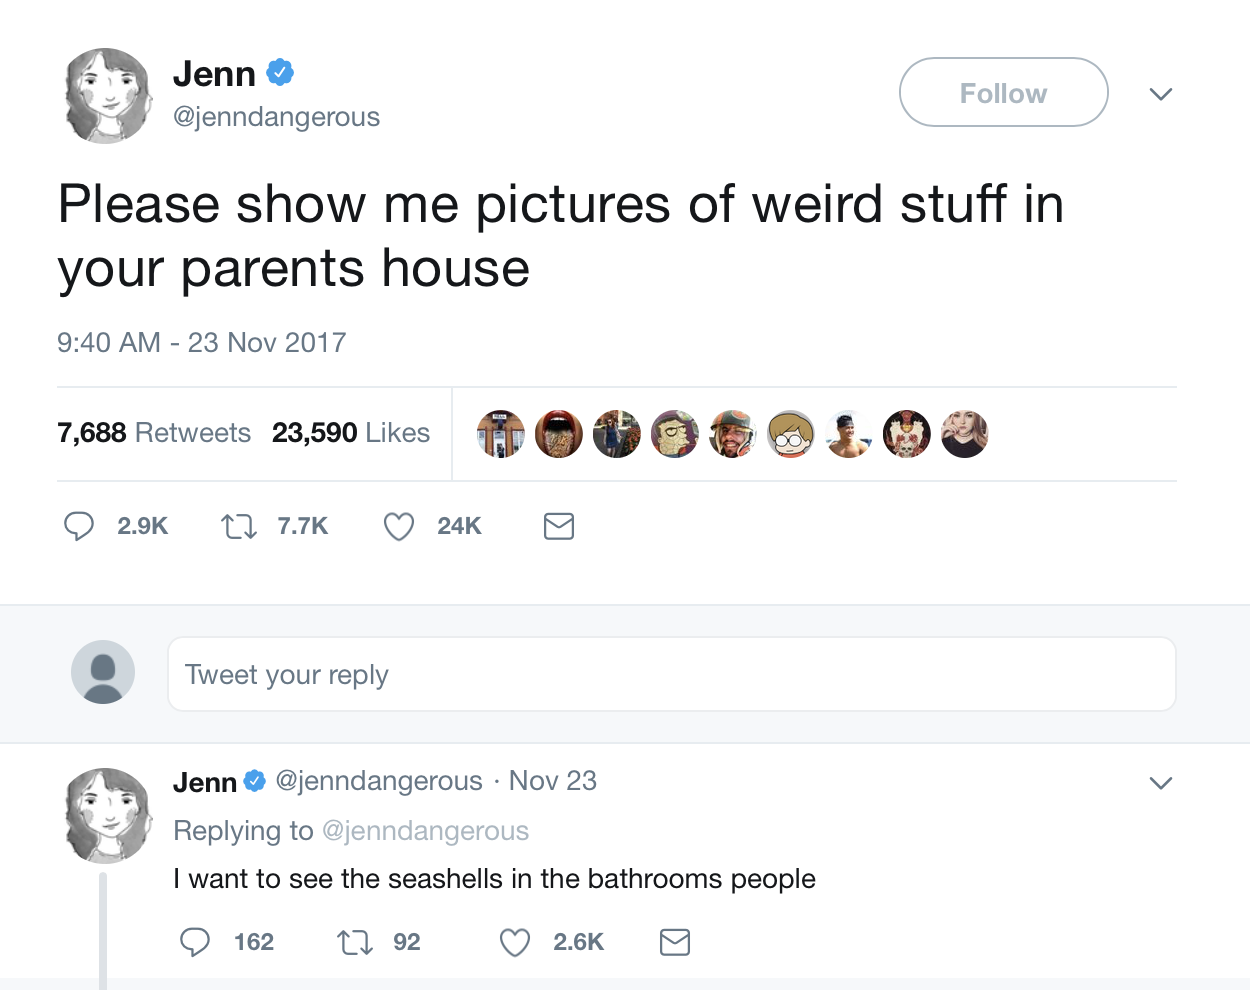 weird stuff on twitter - Jenn Please show me pictures of weird stuff in your parents house 7,688 23,590 0 40 9 Cz 24K Tweet your Jenn Nov 23 I want to see the seashells in the bathrooms people 162 92